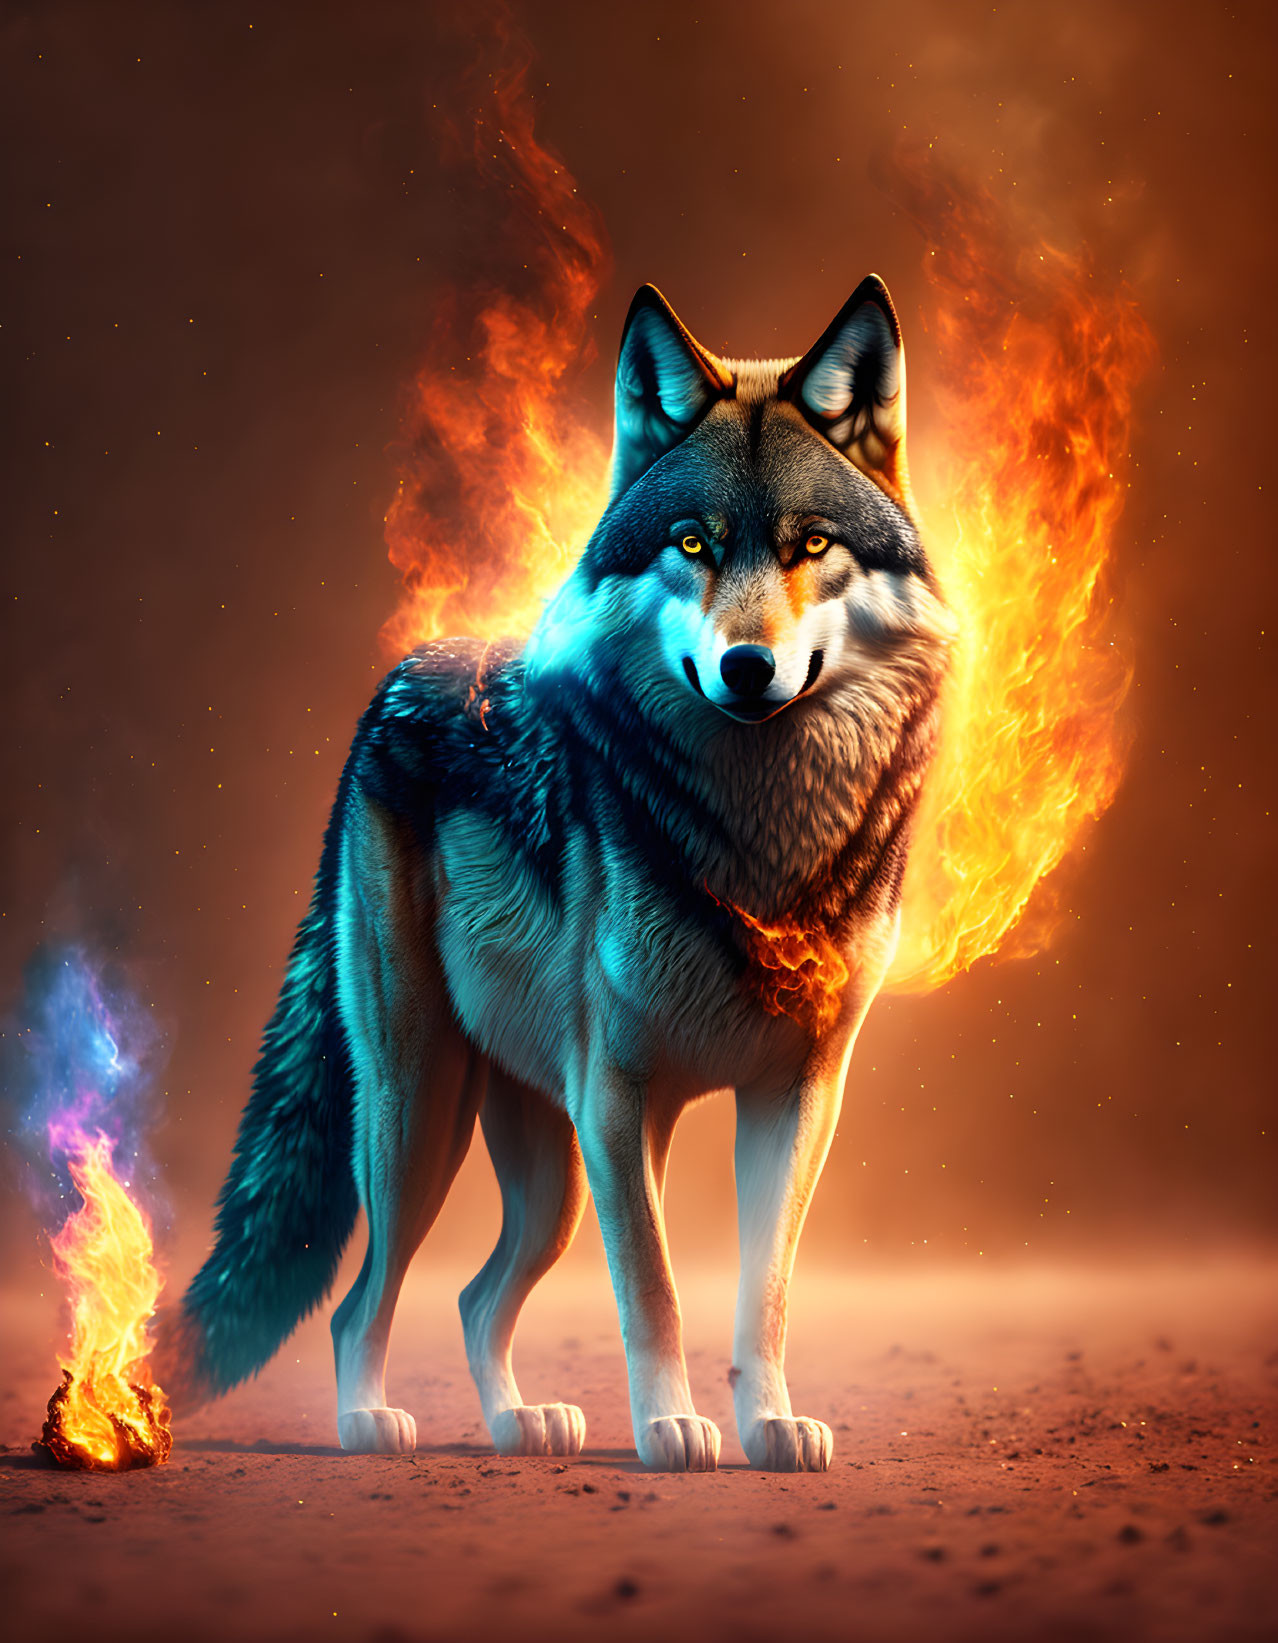 Majestic wolf with vibrant flaming fur against fiery background